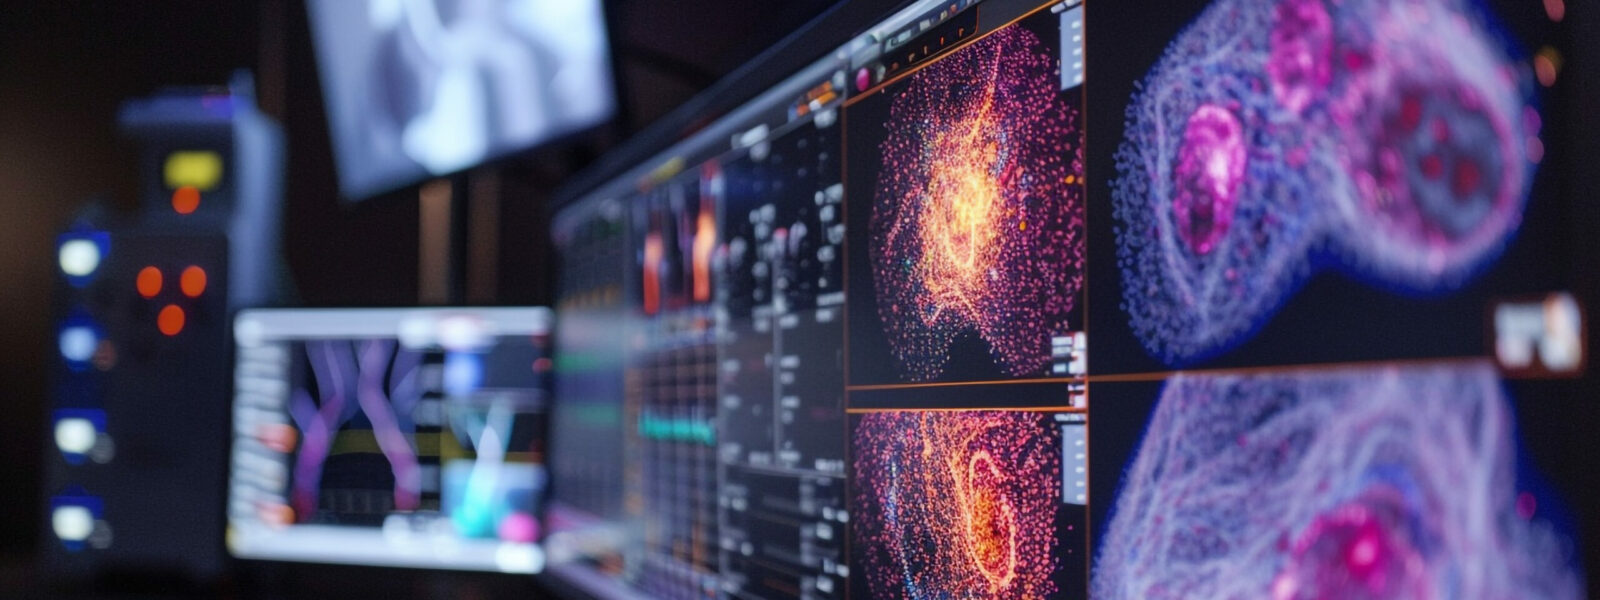 Quantum dots integrated into medical imaging agents, providing high-resolution and accurate diagnostic images.